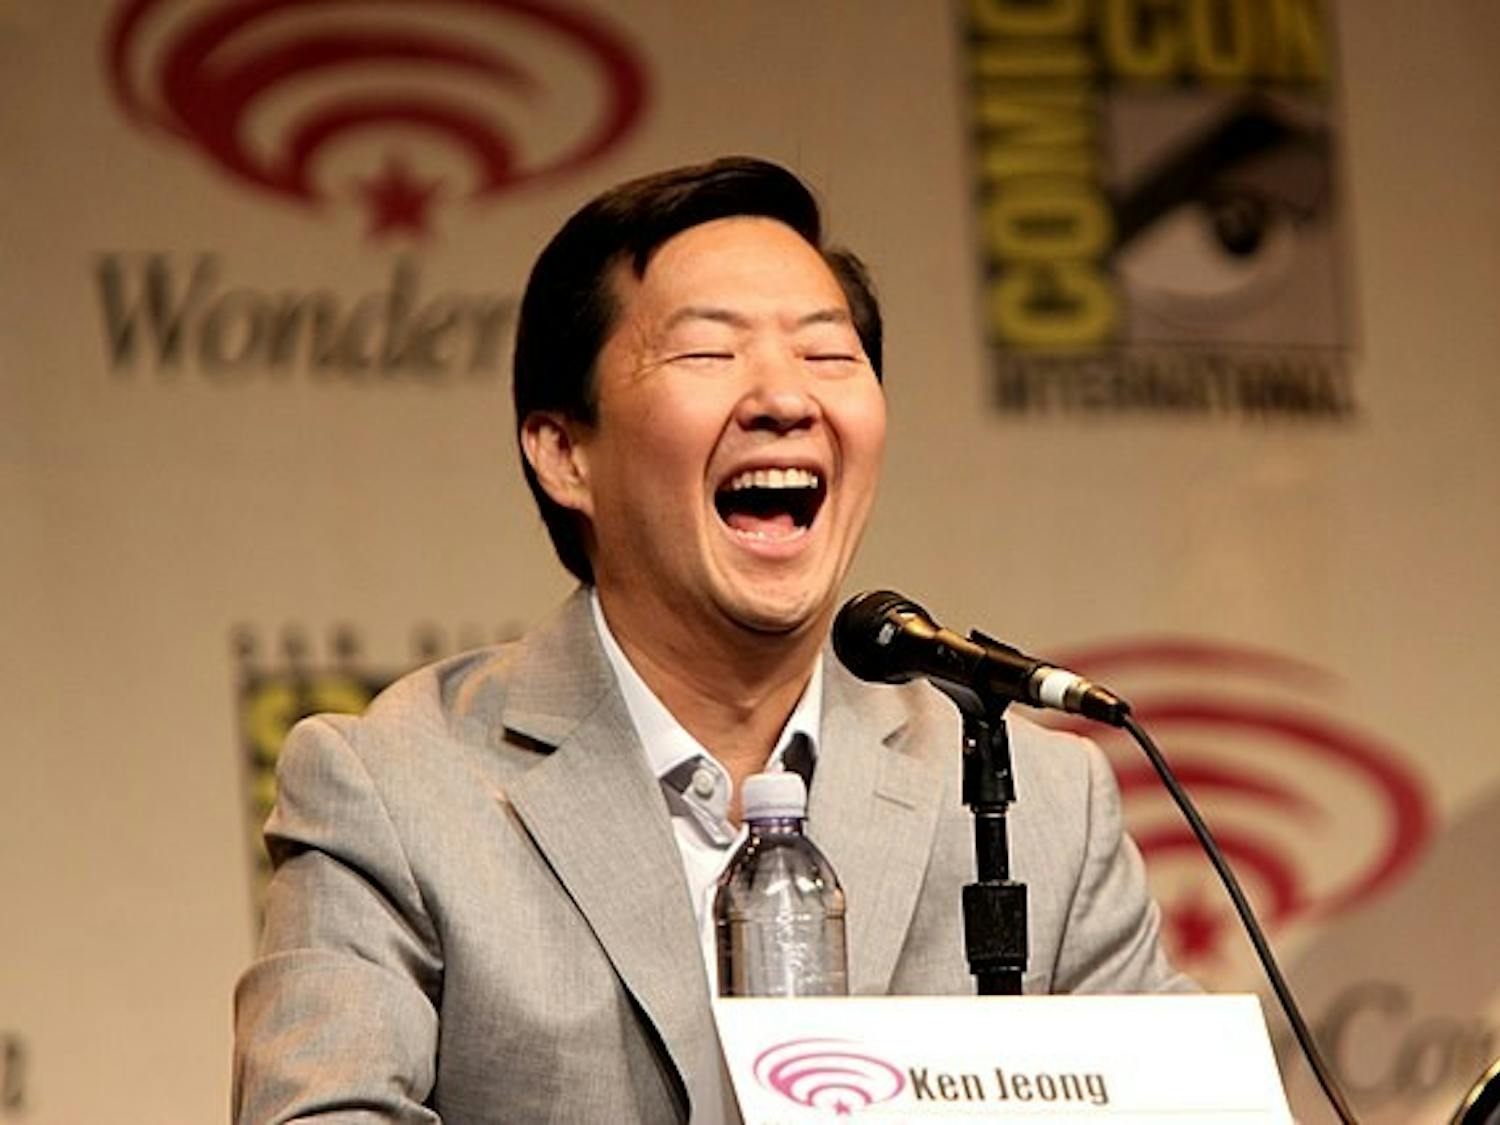 Ken Jeong will open the 2022-23 Distinguished Speaker Series on Tuesday, Oct. 11 in the UB Center for the Arts.&nbsp;